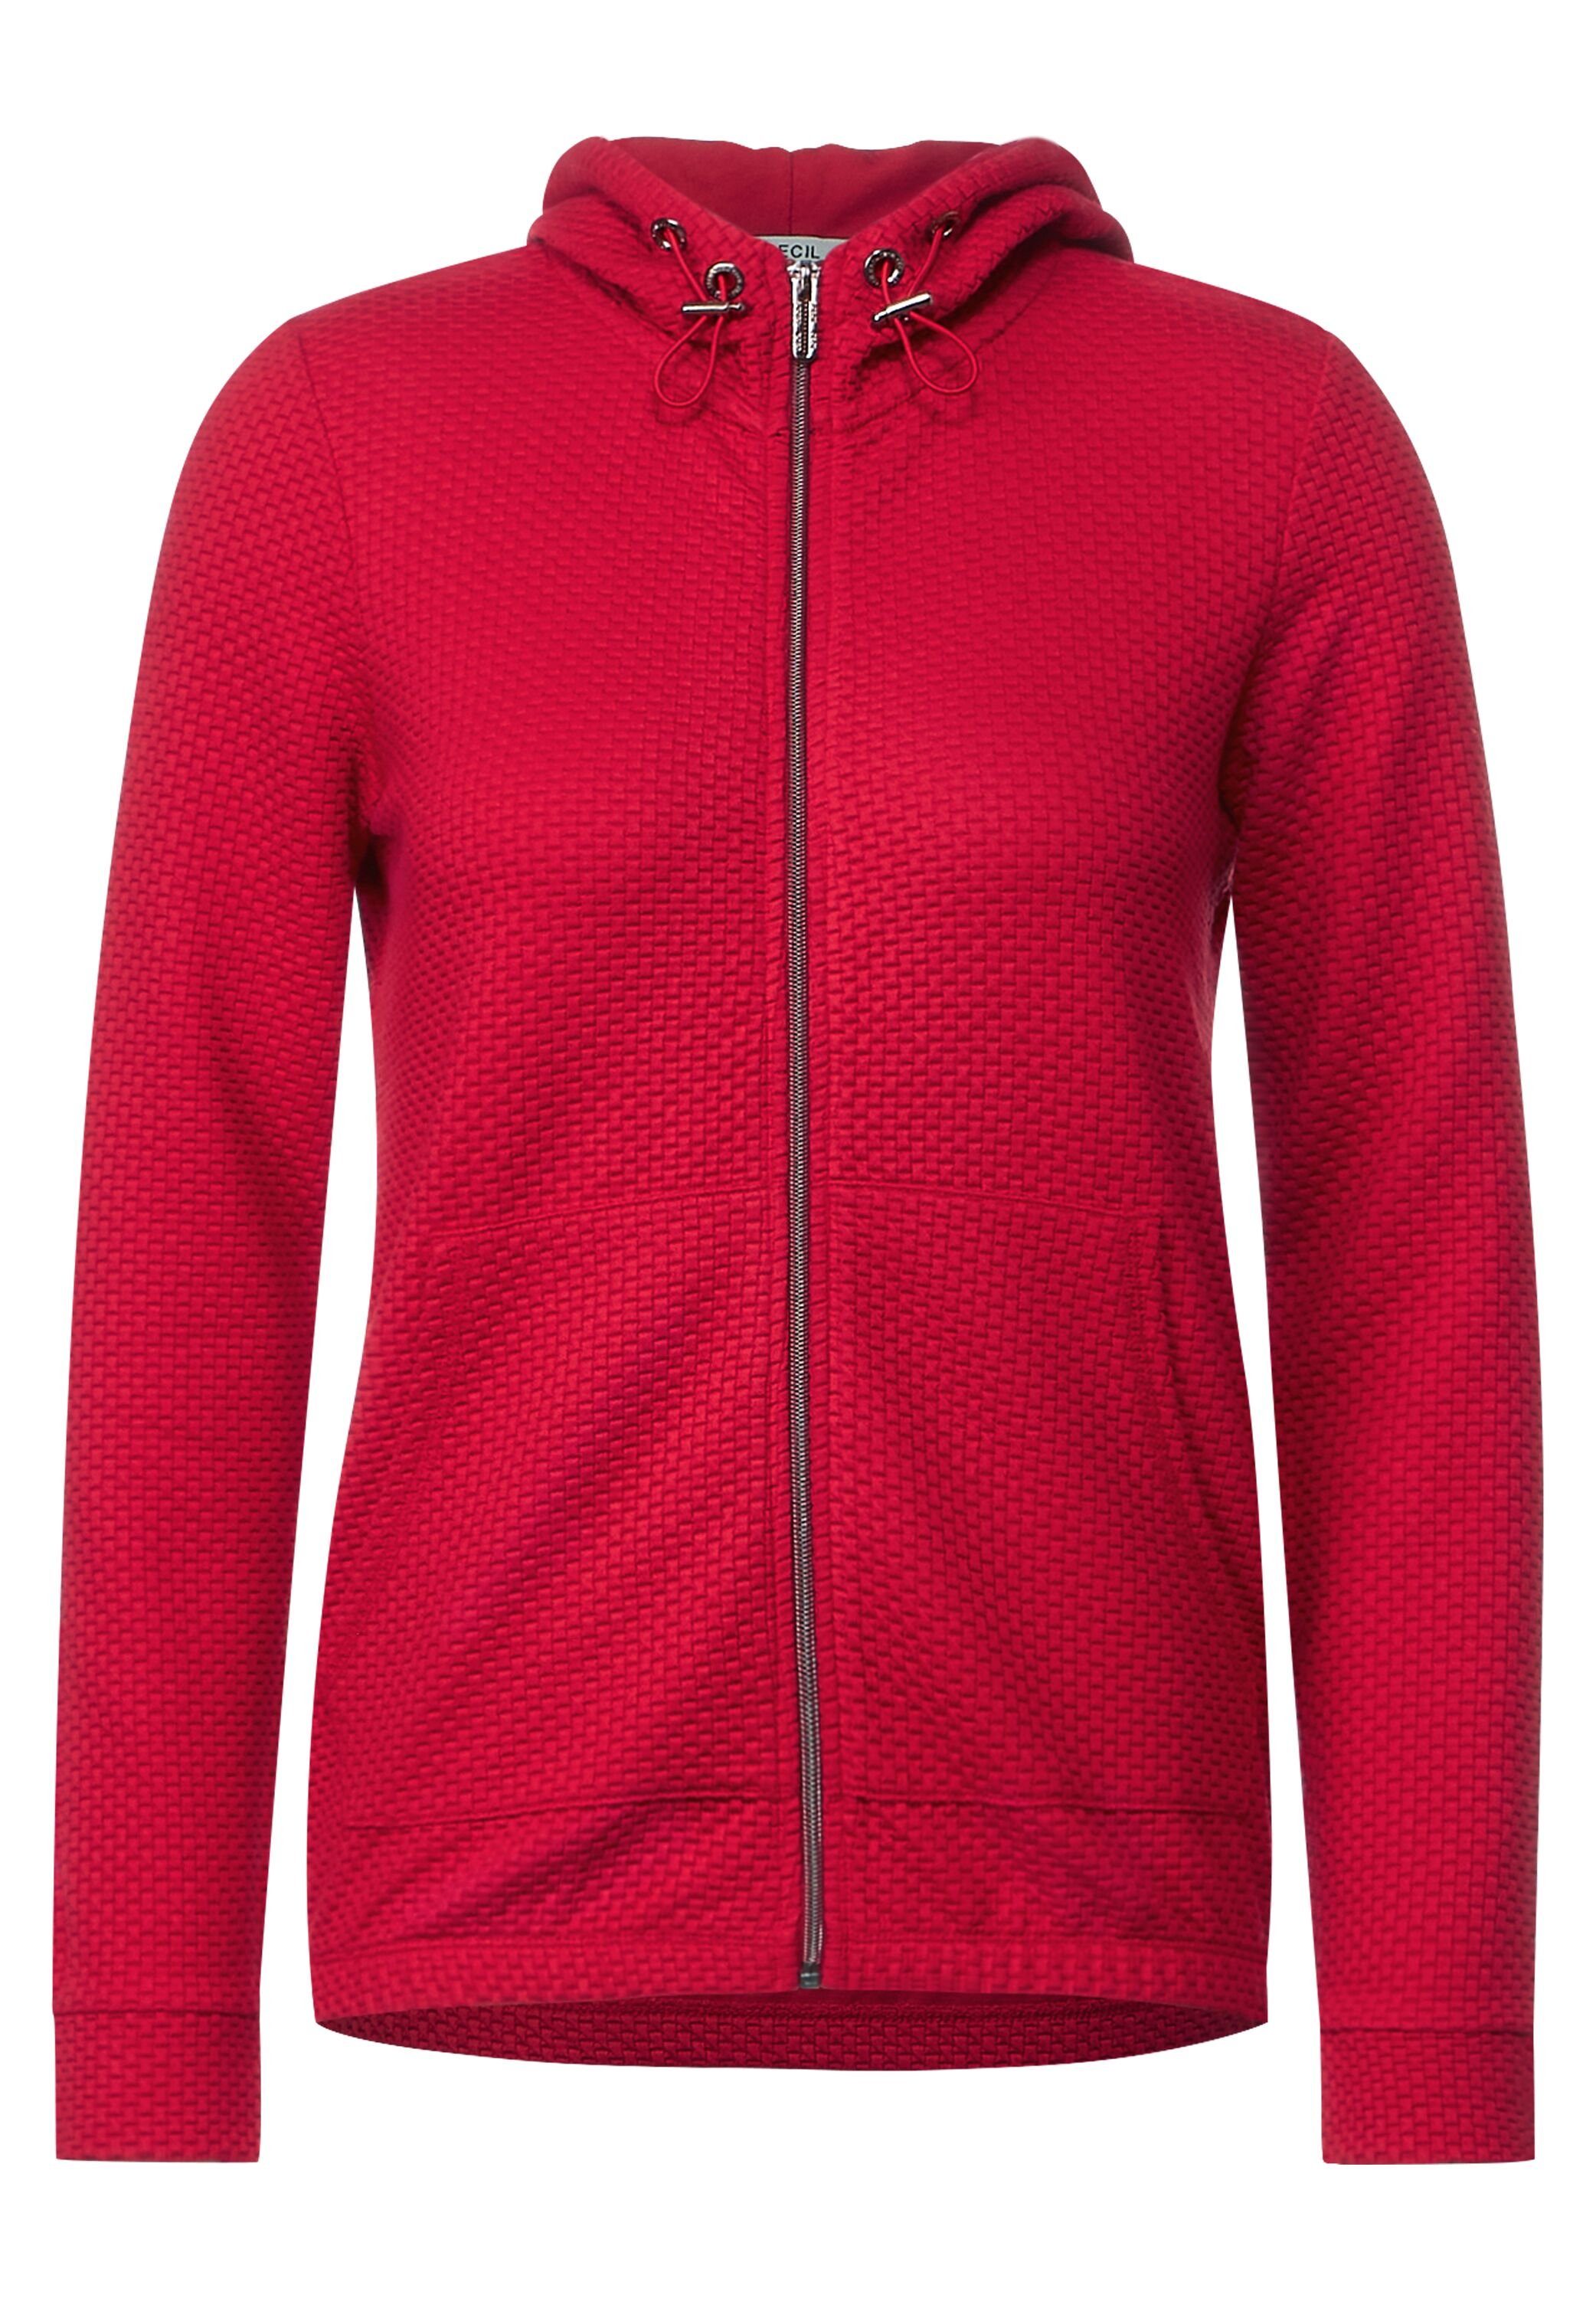 Cecil Shirtjacke Struktur casual mit red